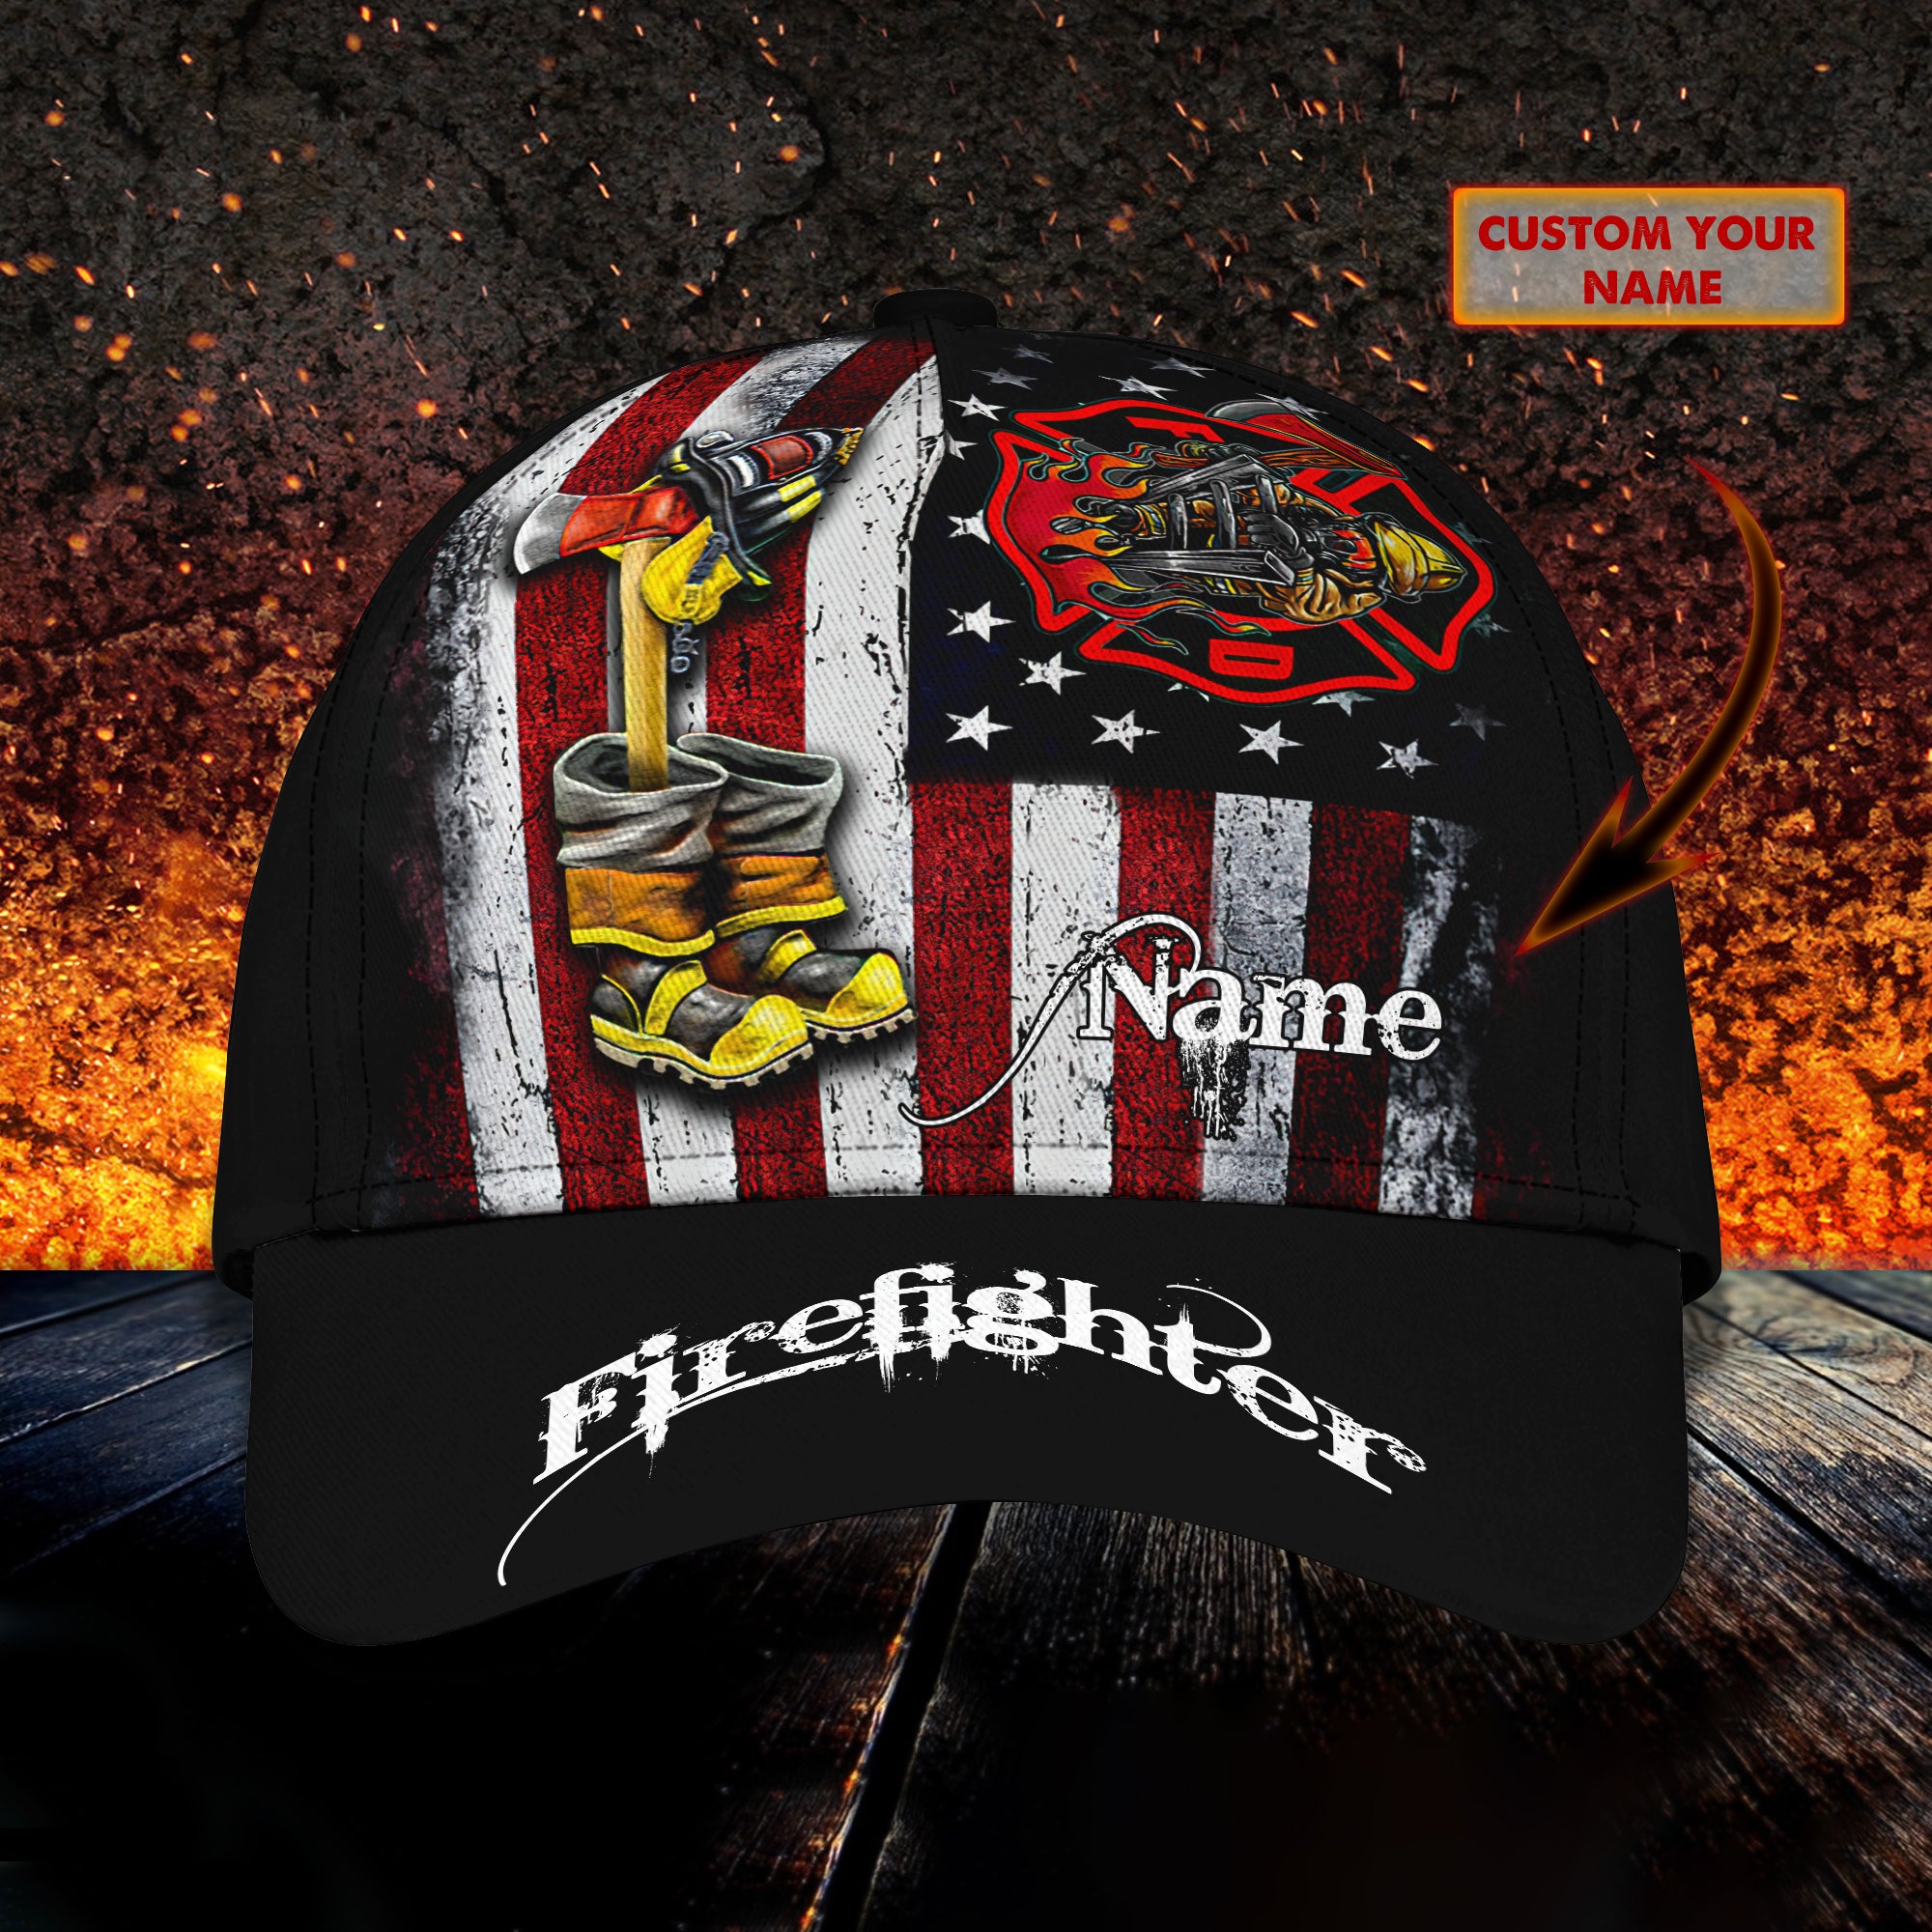 Firefighter 18 - Personalized Name Cap - QA99